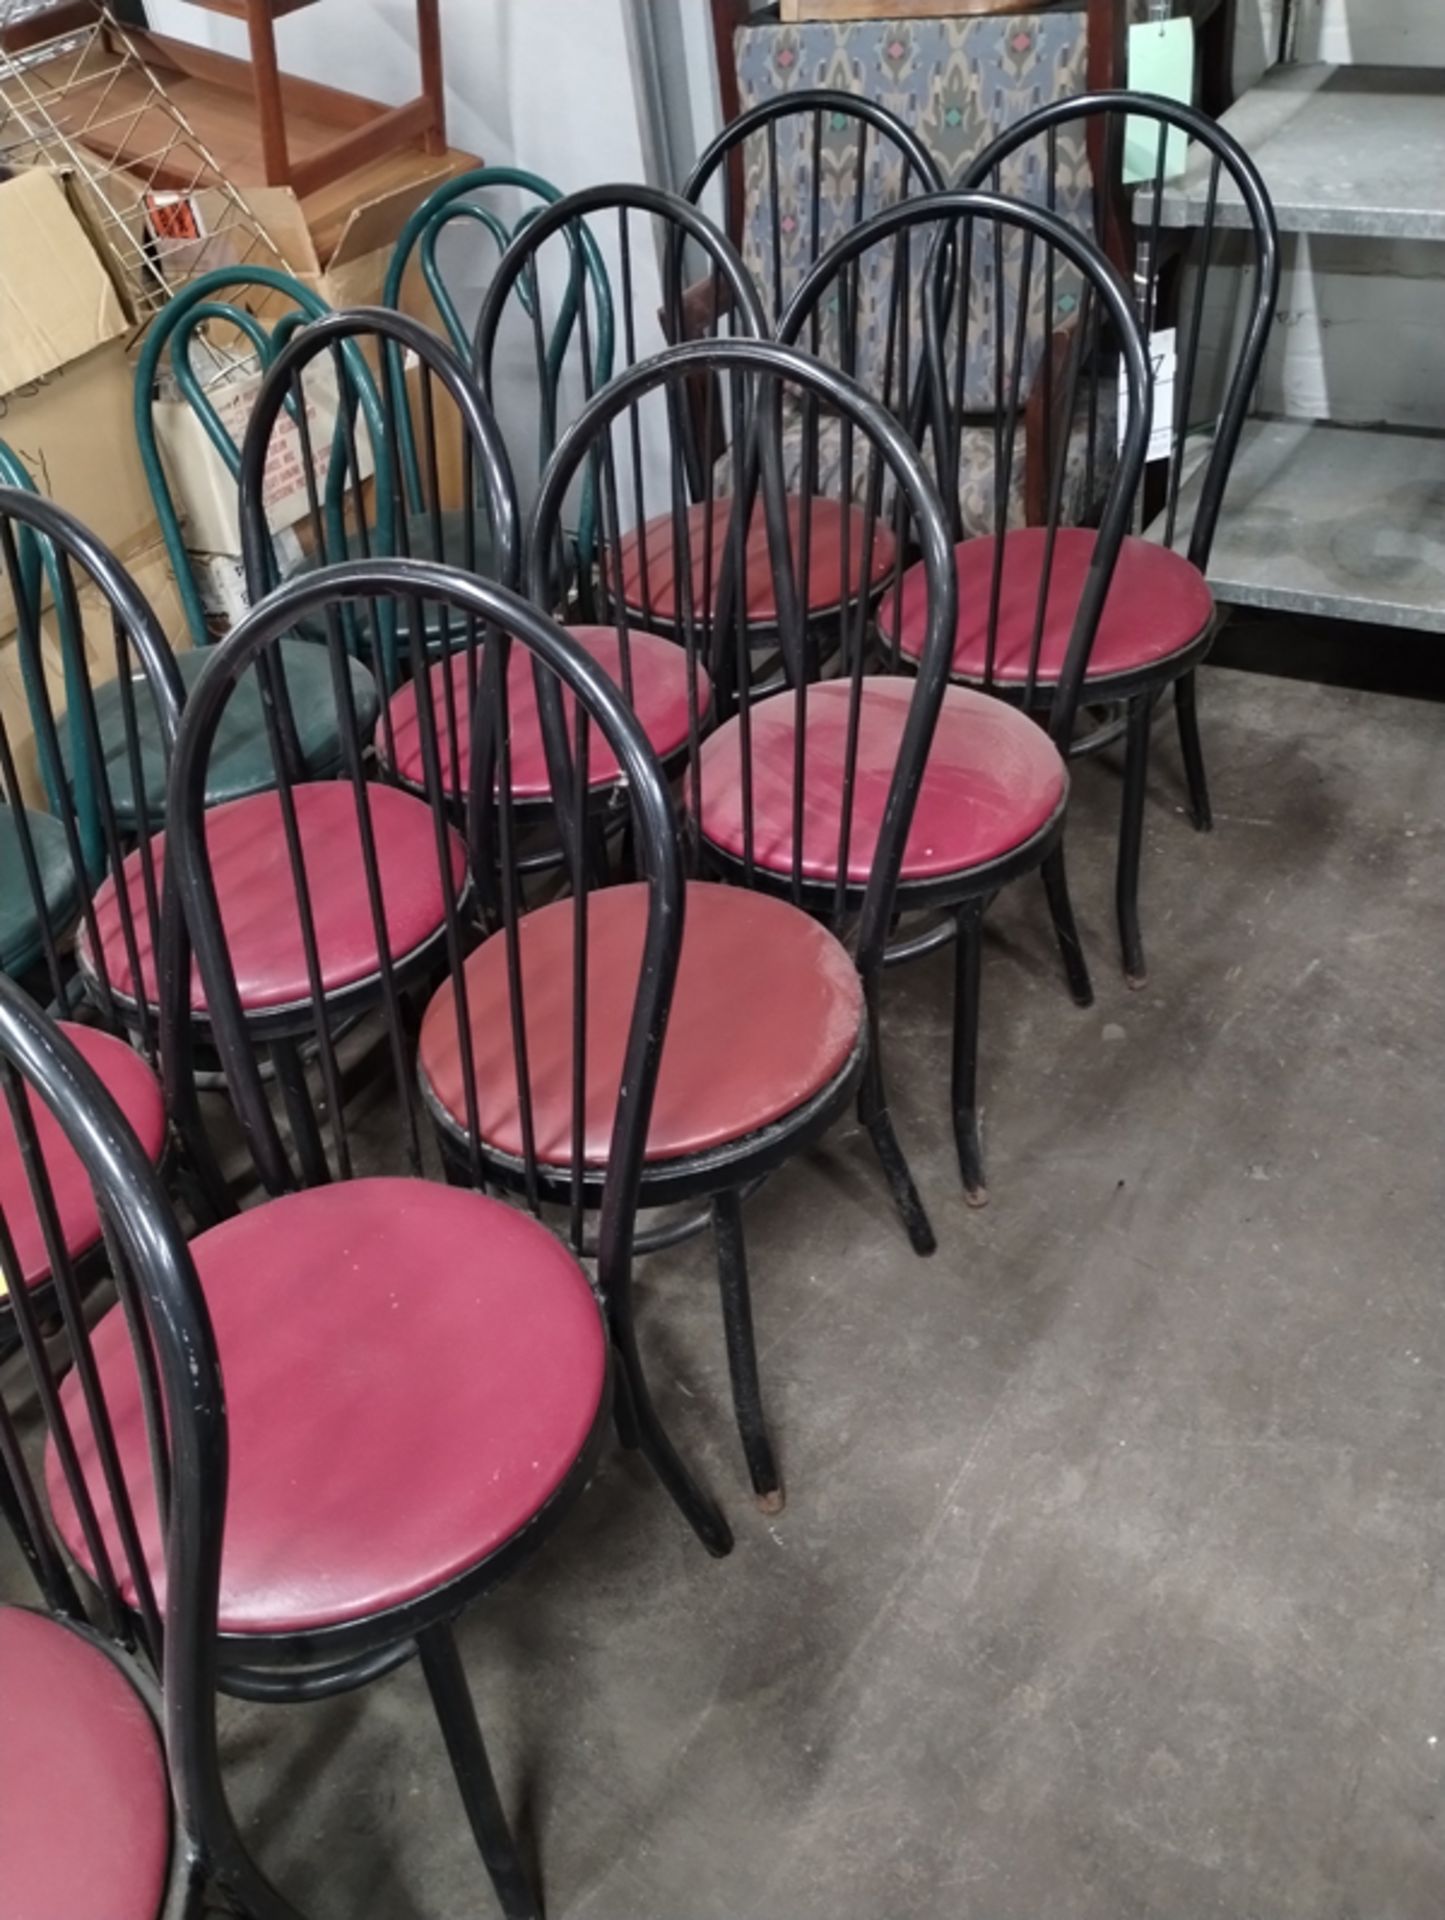 11 RESTAURANT CHAIRS - BLACK AND RED WITH METAL FRAME - Image 3 of 4